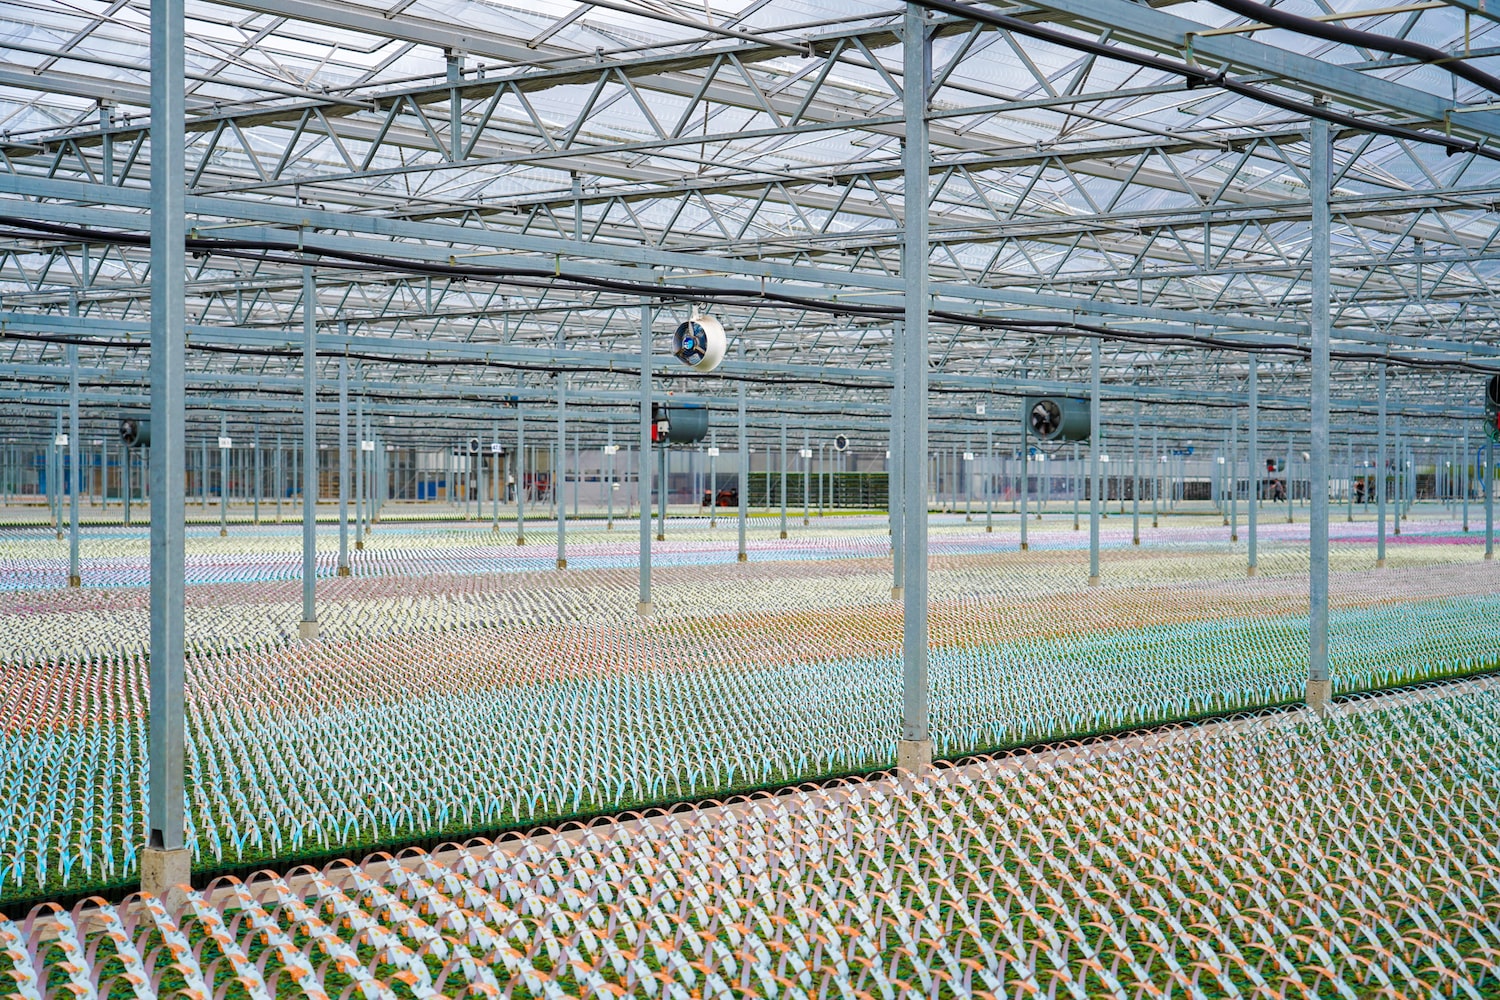 The Ambroses large greenhouse filled with pots of plants and flowers of different colours, far into the distance. The greenhouse is glass roofed and metal framed, with lots of metal pillars scattered throughout and fans hanging from the ceiling.